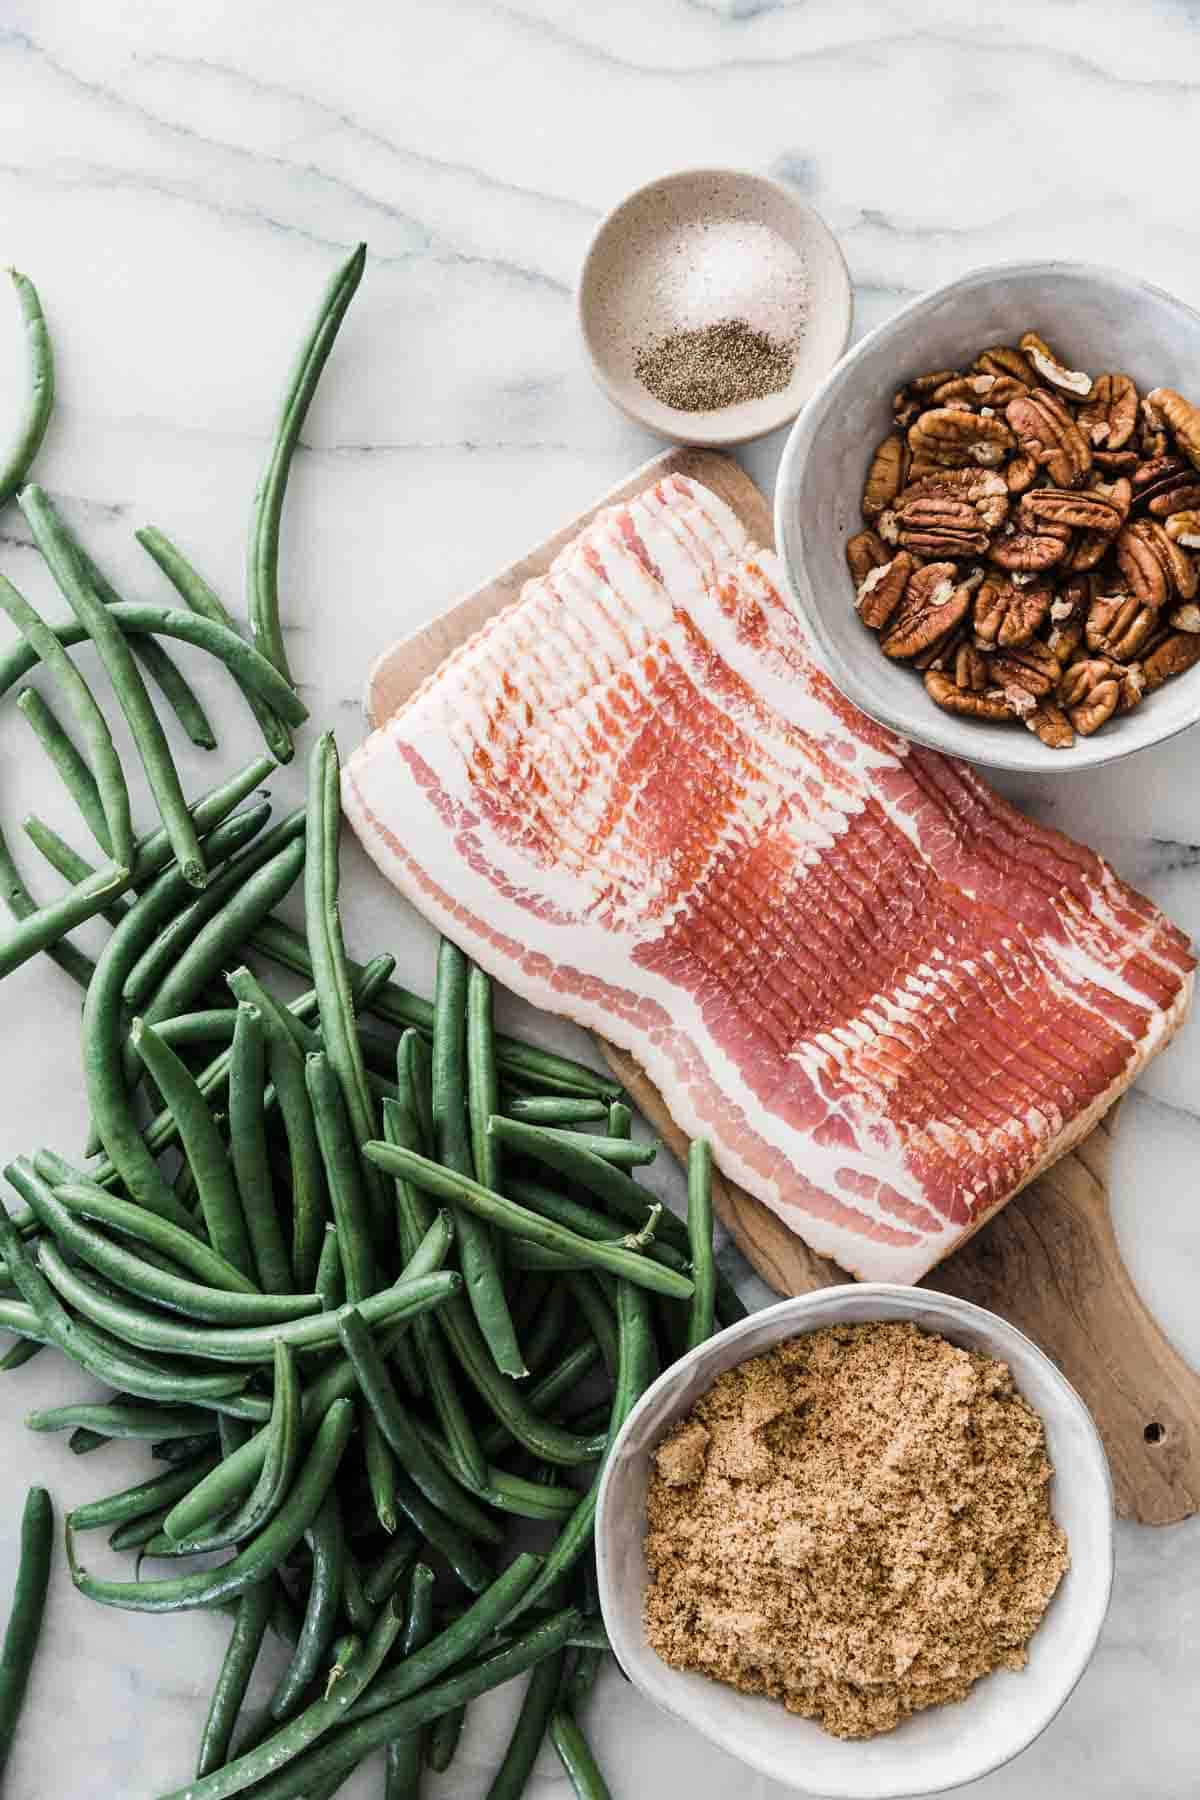 Bacon, green beans, pecans, brown sugar, and salt and pepper on a marble counter.